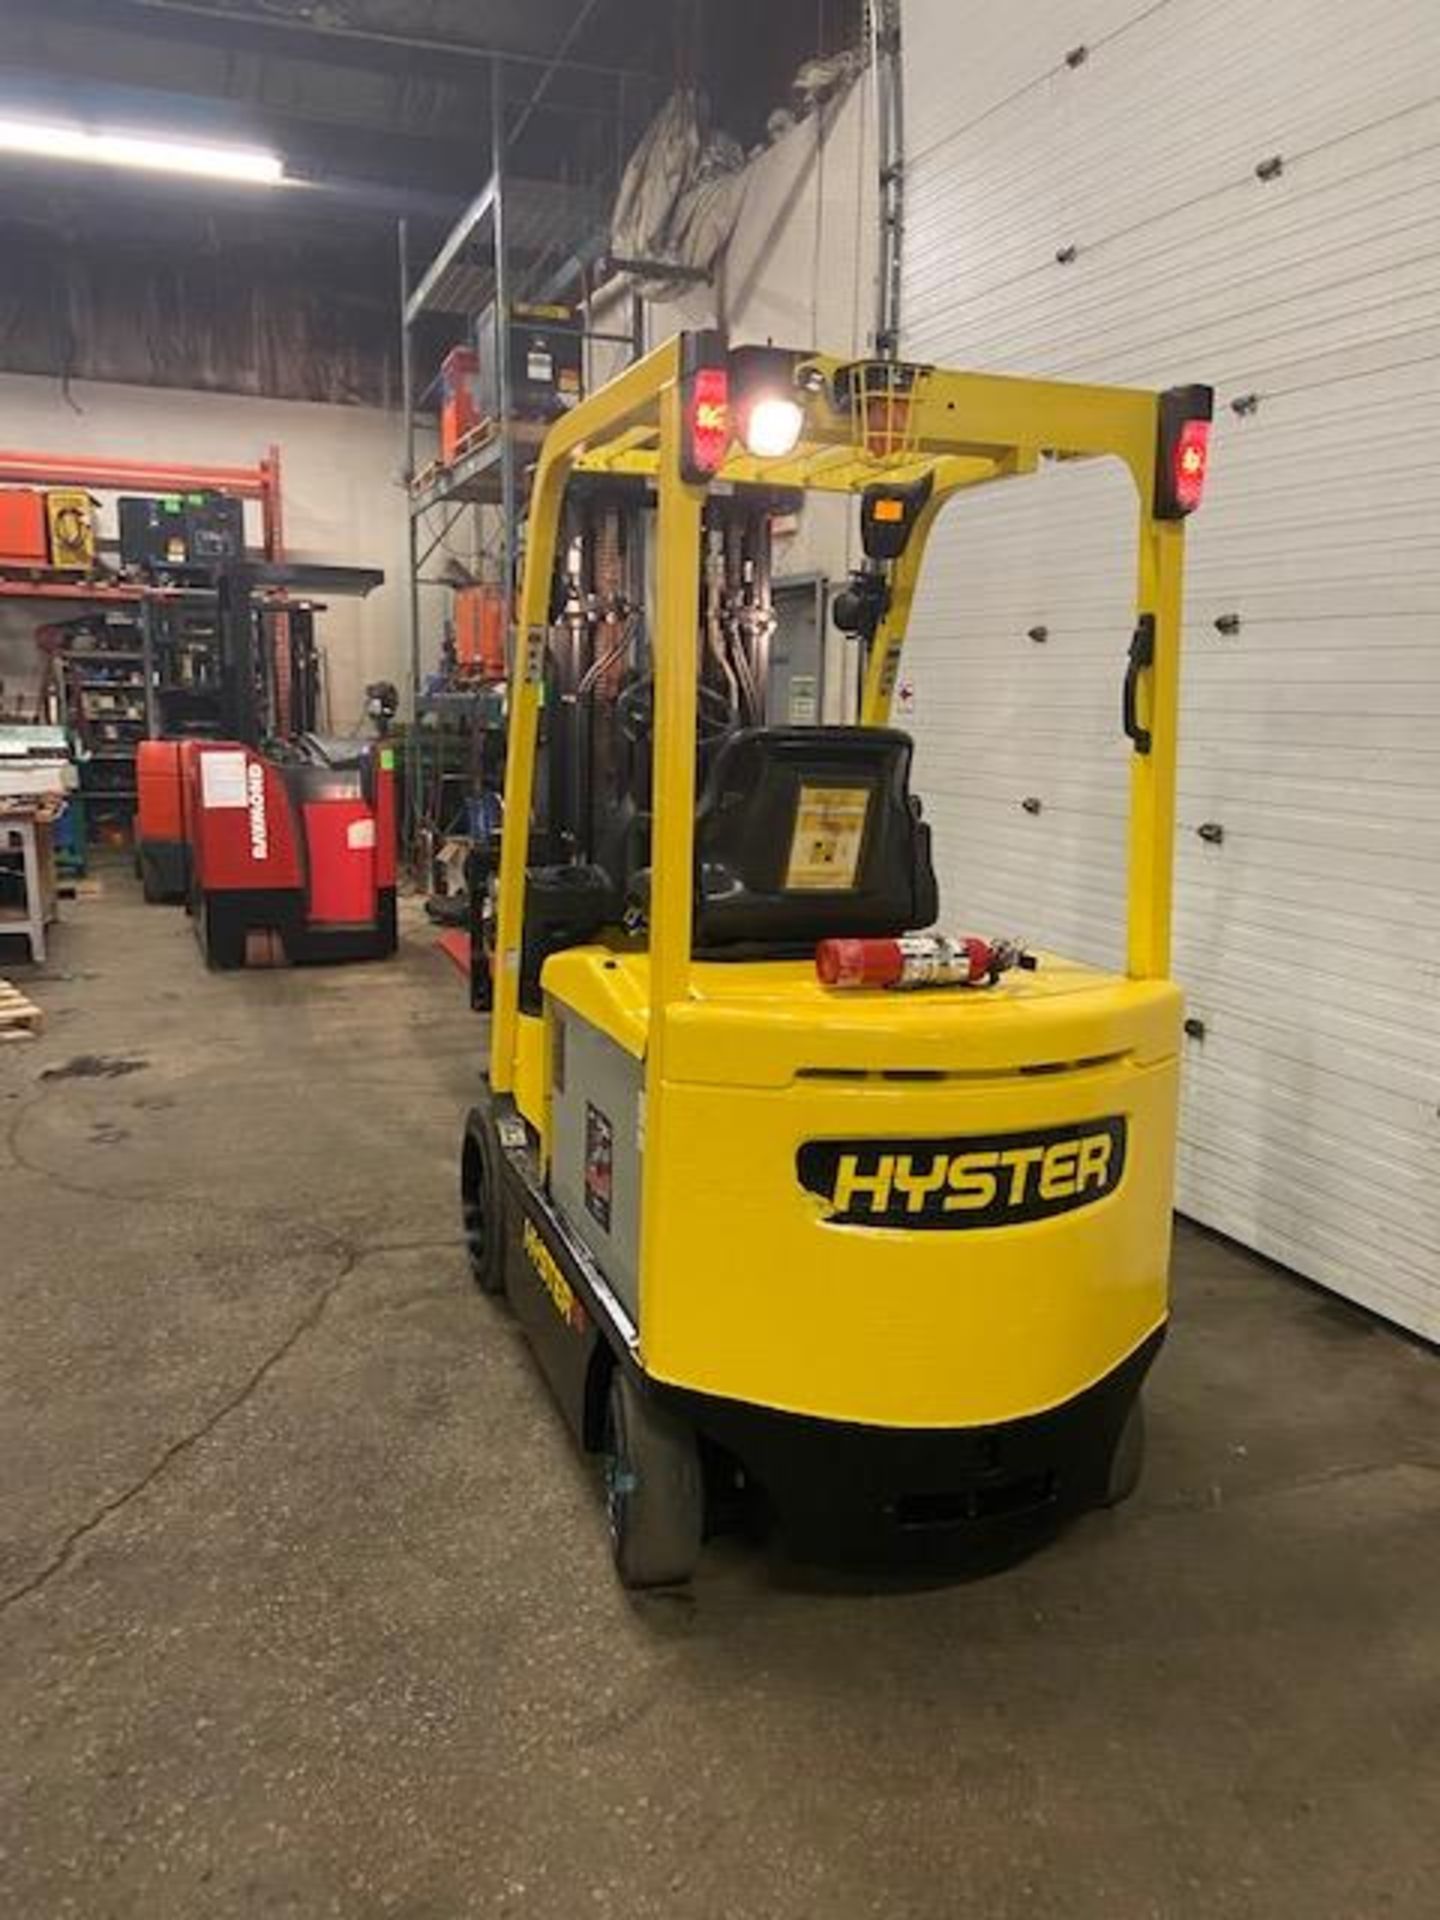 FREE CUSTOMS - 2013 Hyster 5000lbs Capacity Forklift Electric with 3-STAGE MAST sideshift & 60" - Image 3 of 3